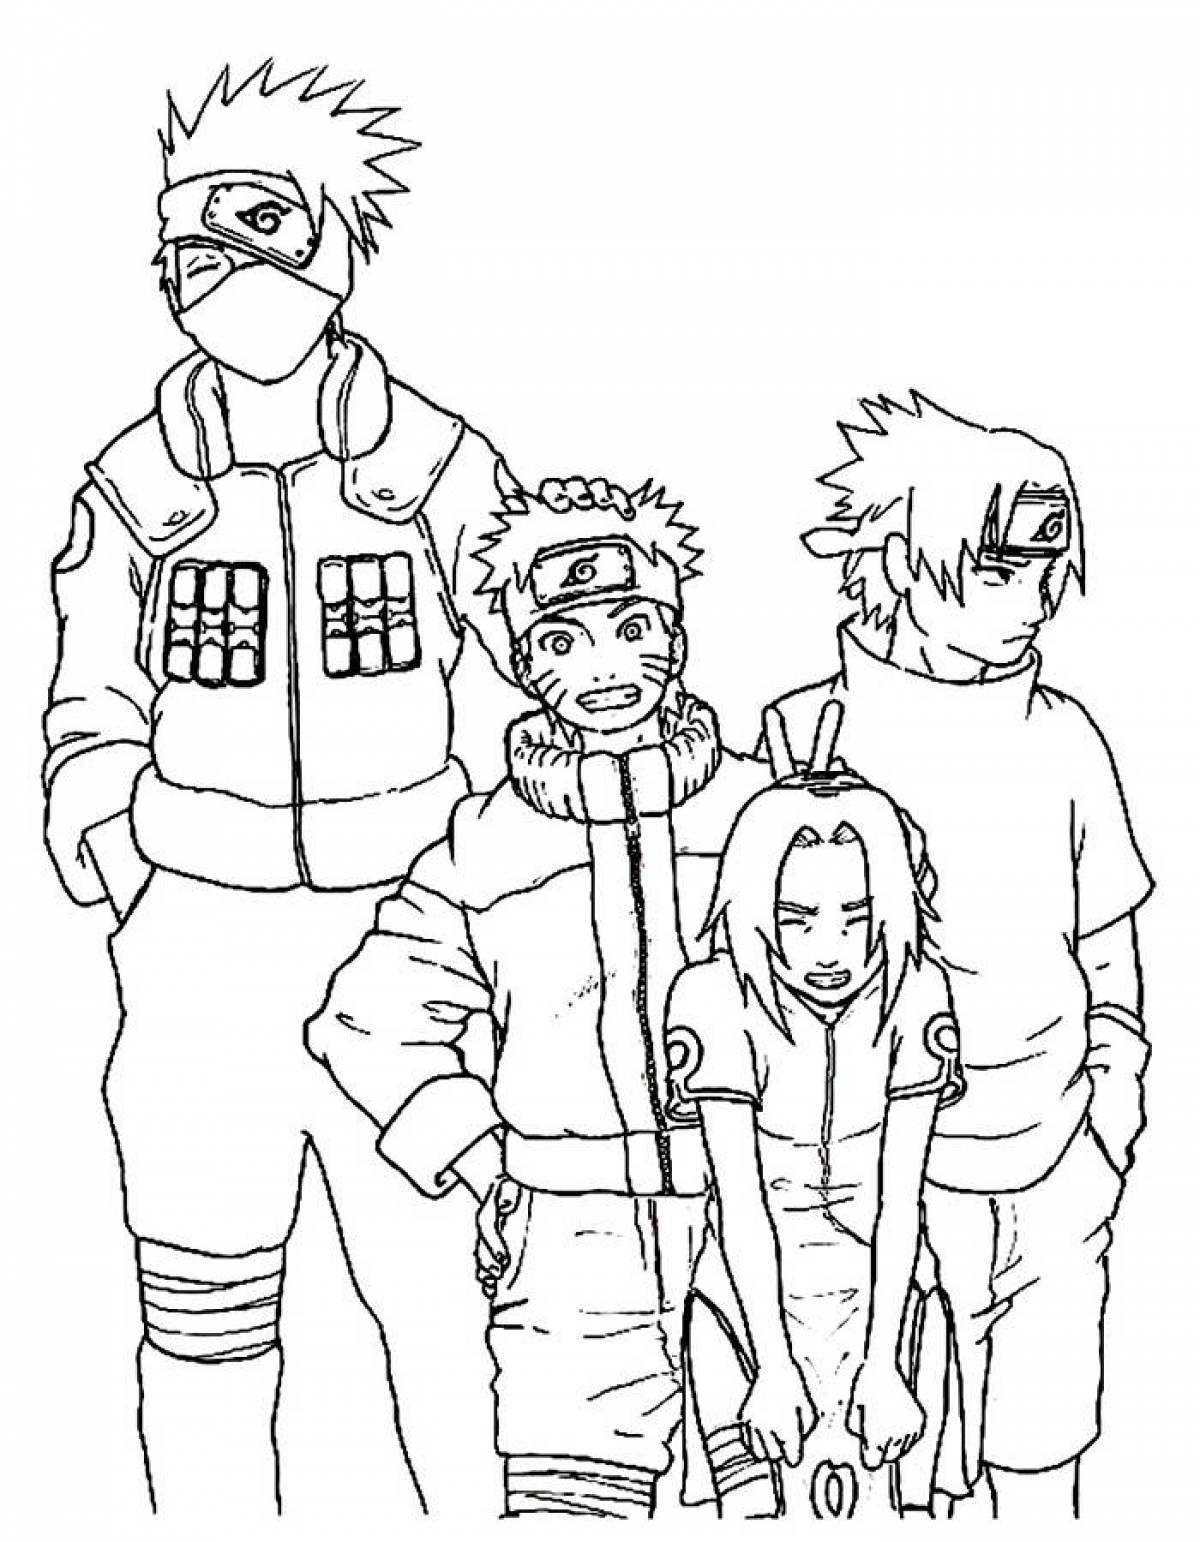 Amazing naruto coloring book for kids